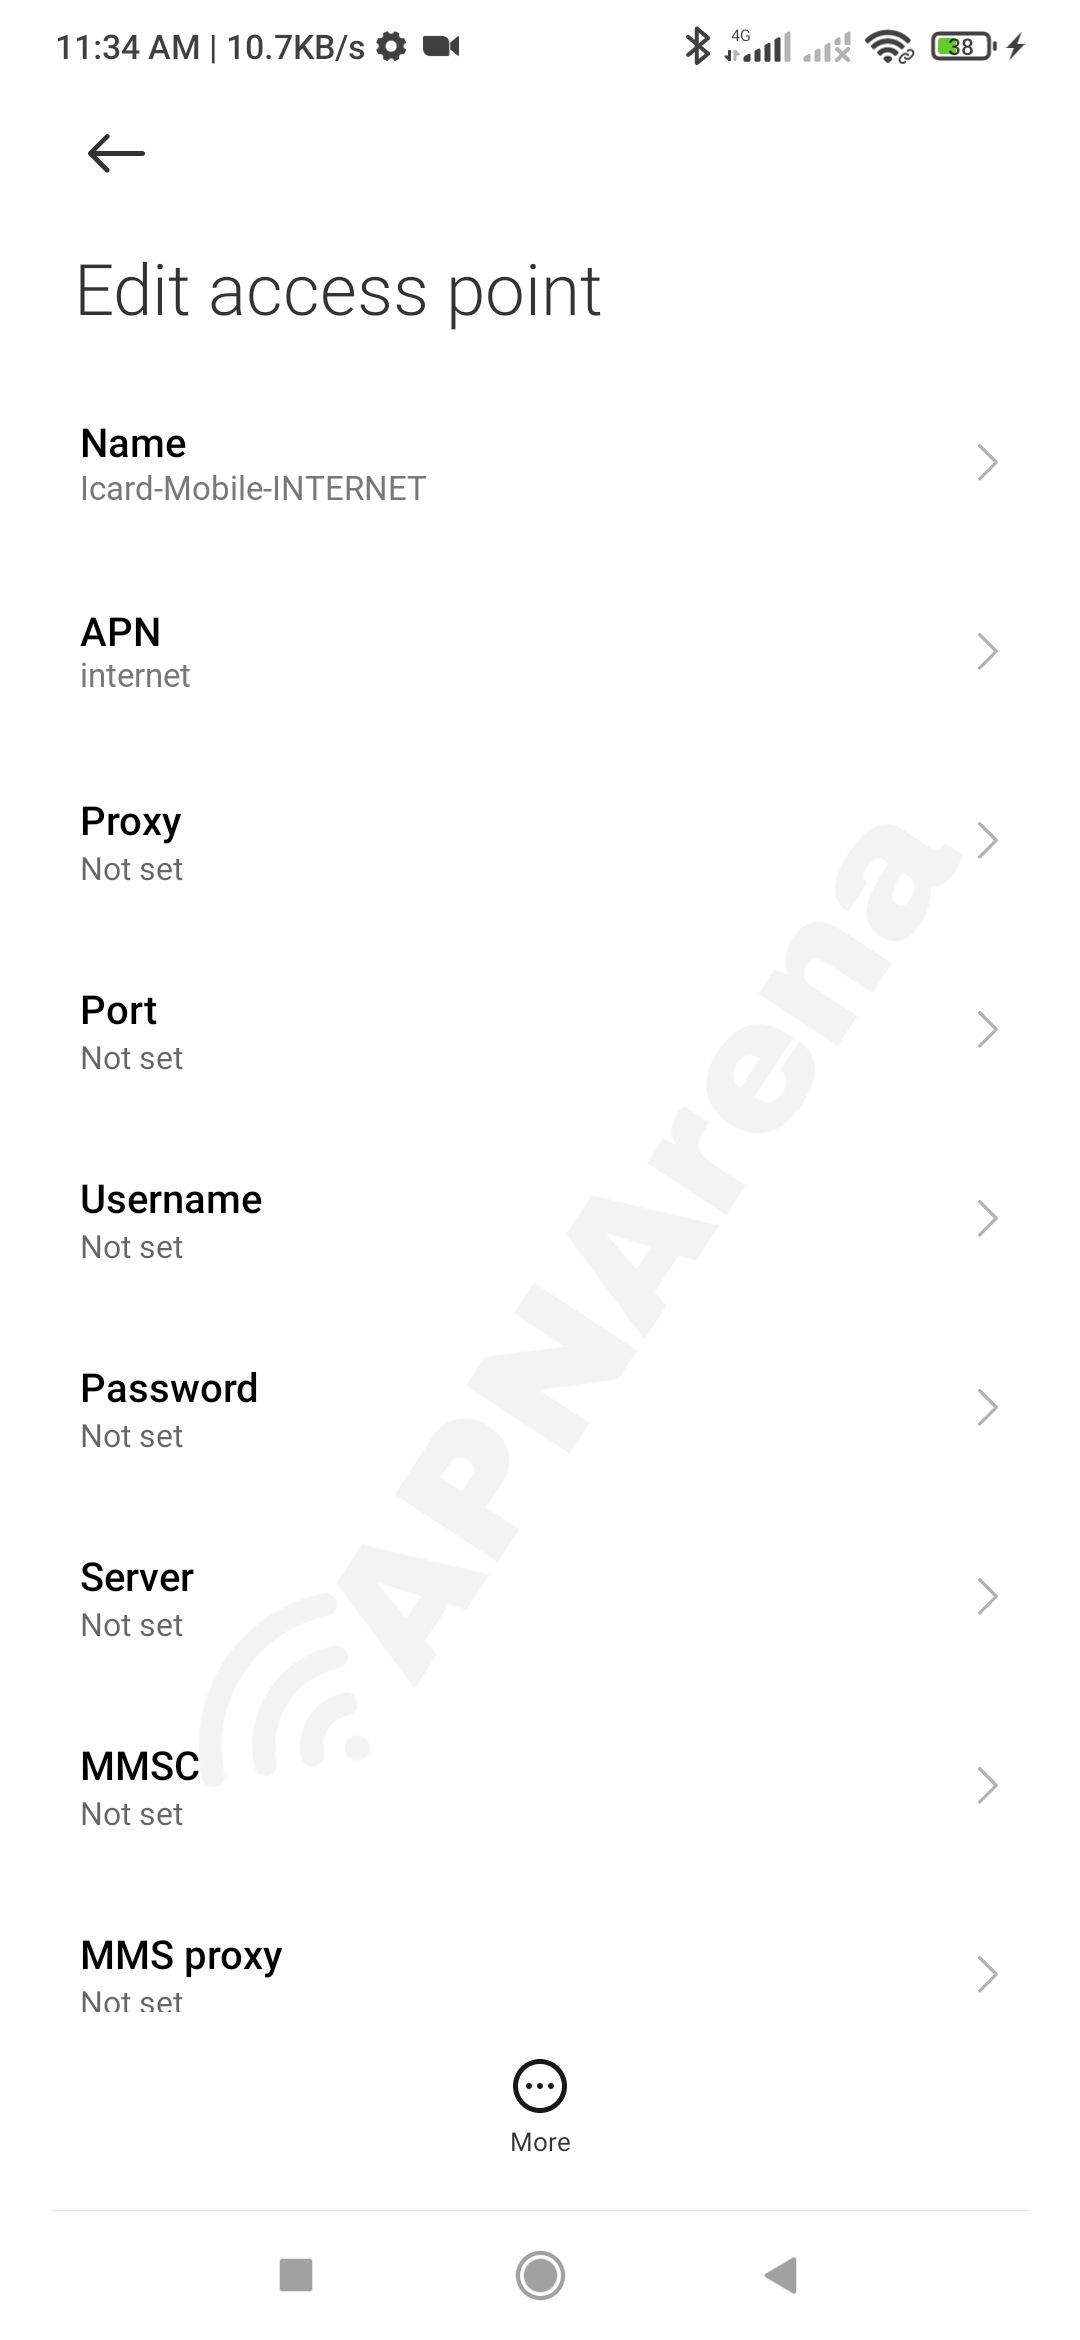 iCard Mobile APN Settings for Android